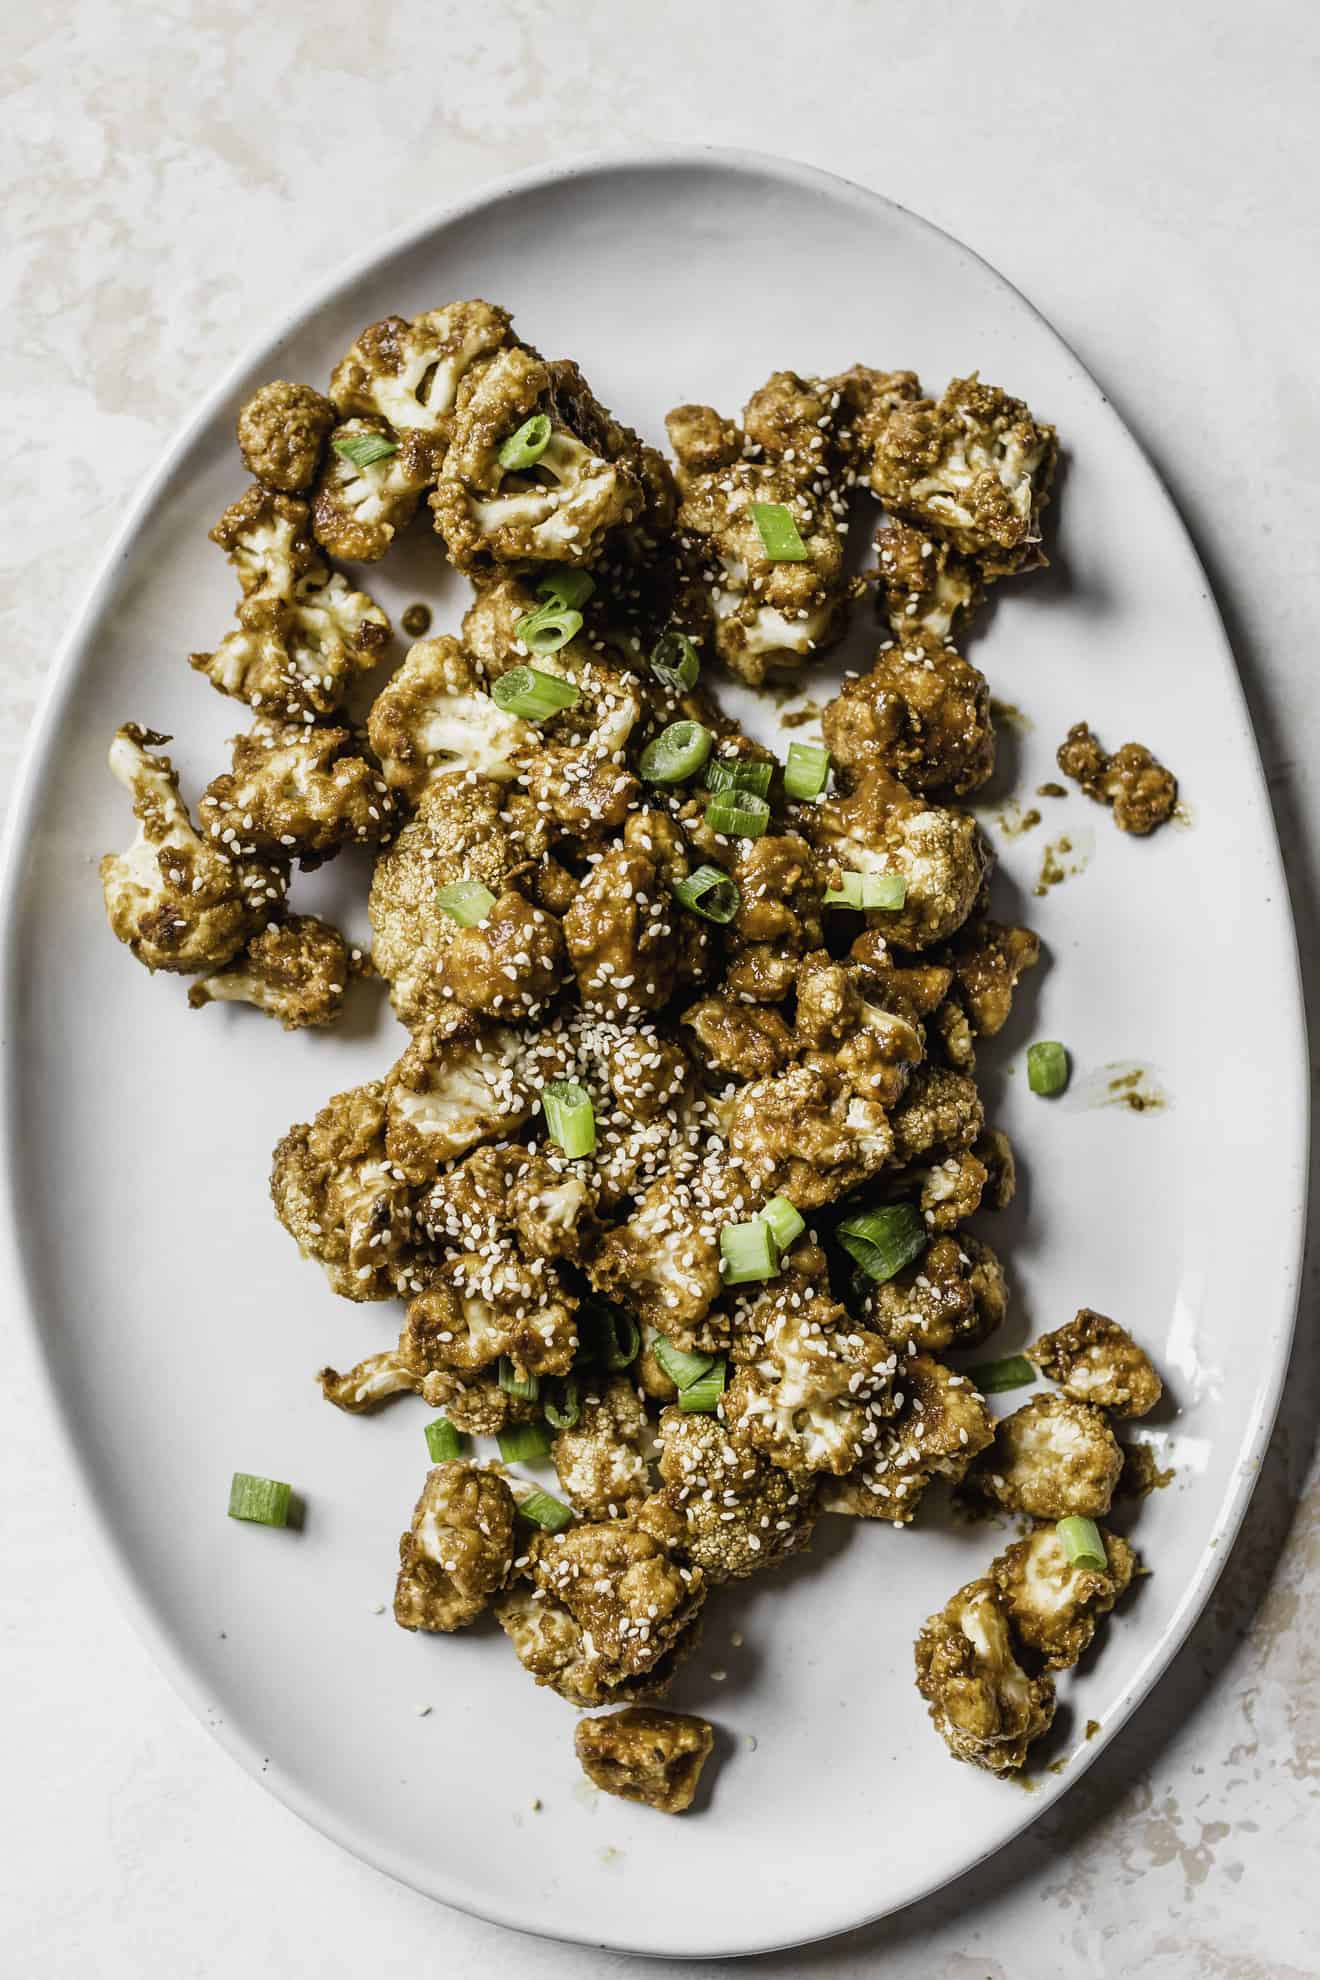 It’s you’re looking for a gluten free and low carb recipe that also happens to be insanely delicious, these SunButter Cauliflower Poppers do not disappoint!